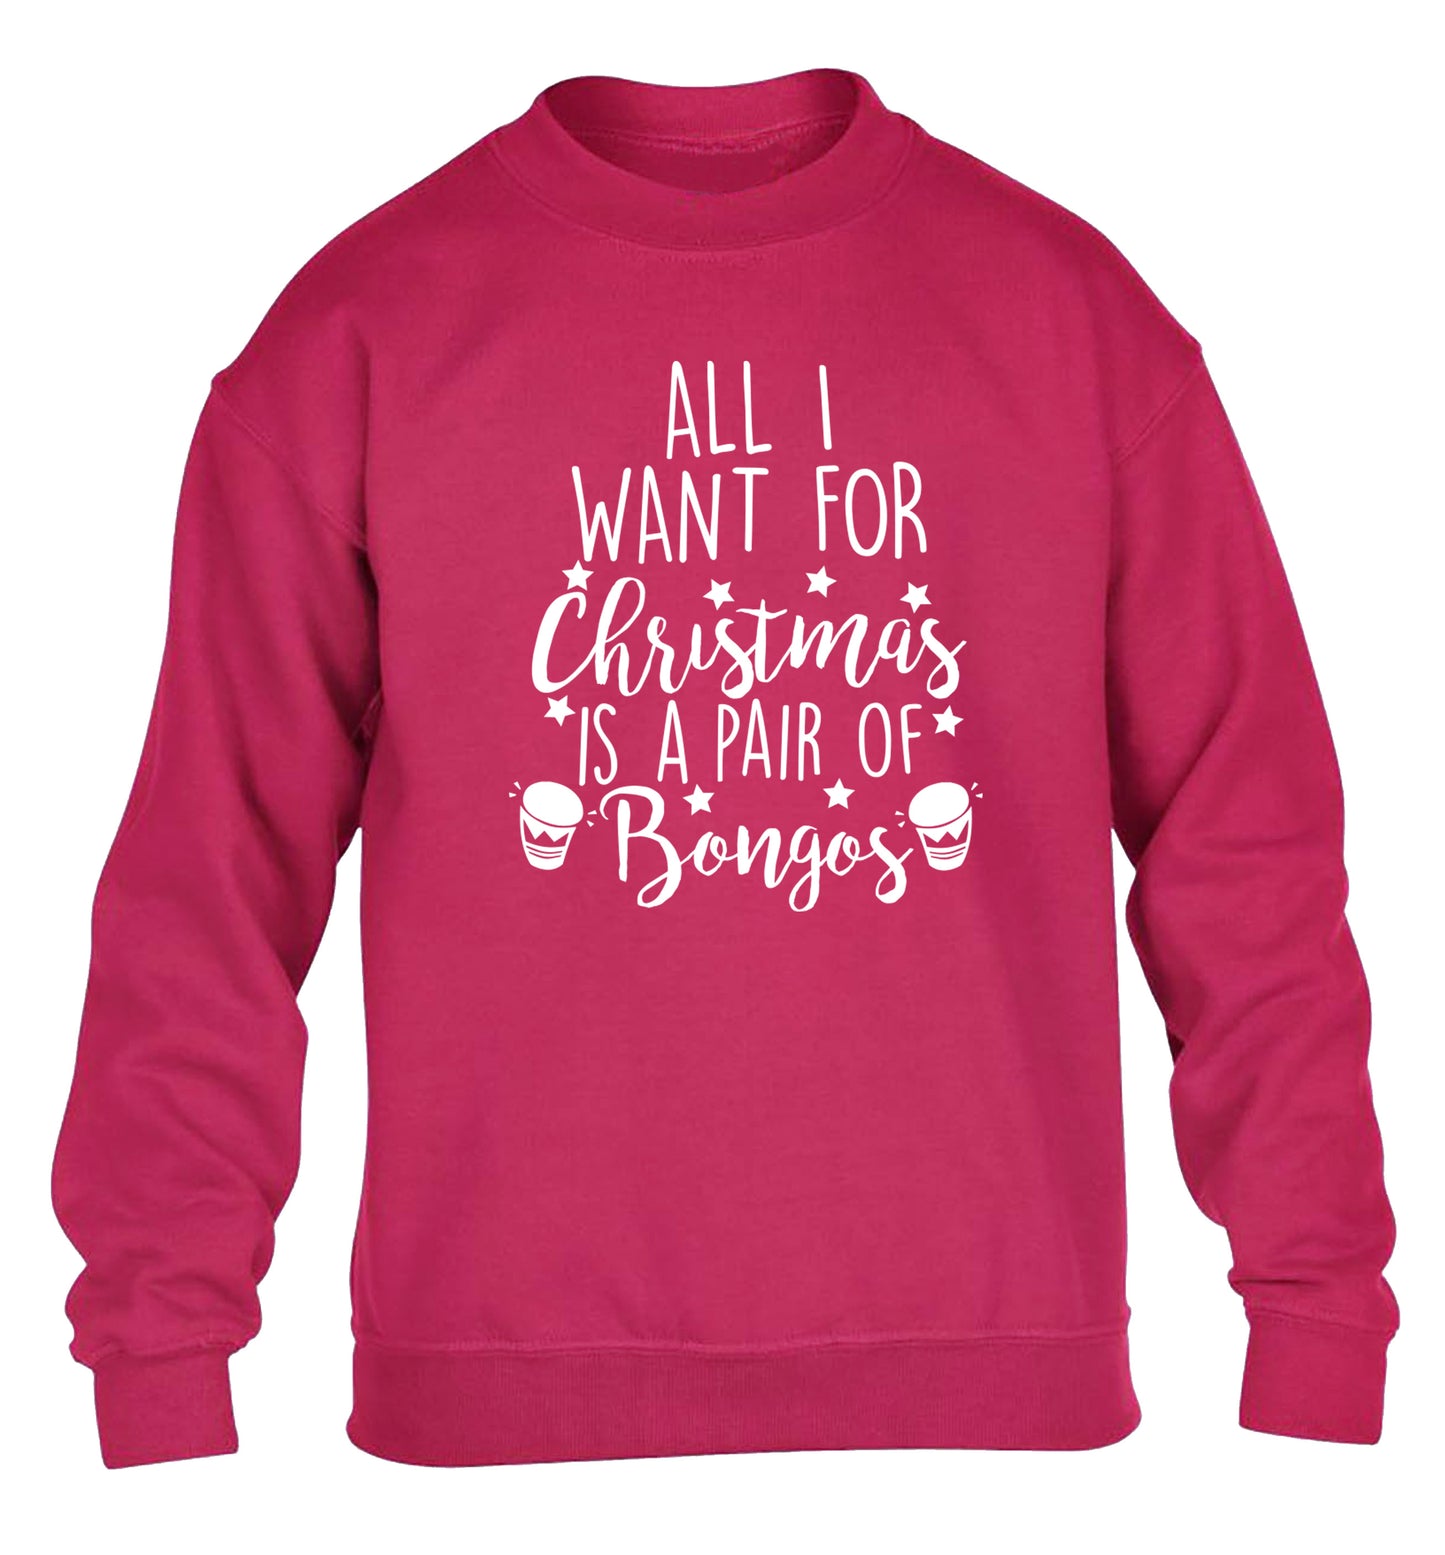 All I want for Christmas is a pair of bongos! children's pink sweater 12-14 Years